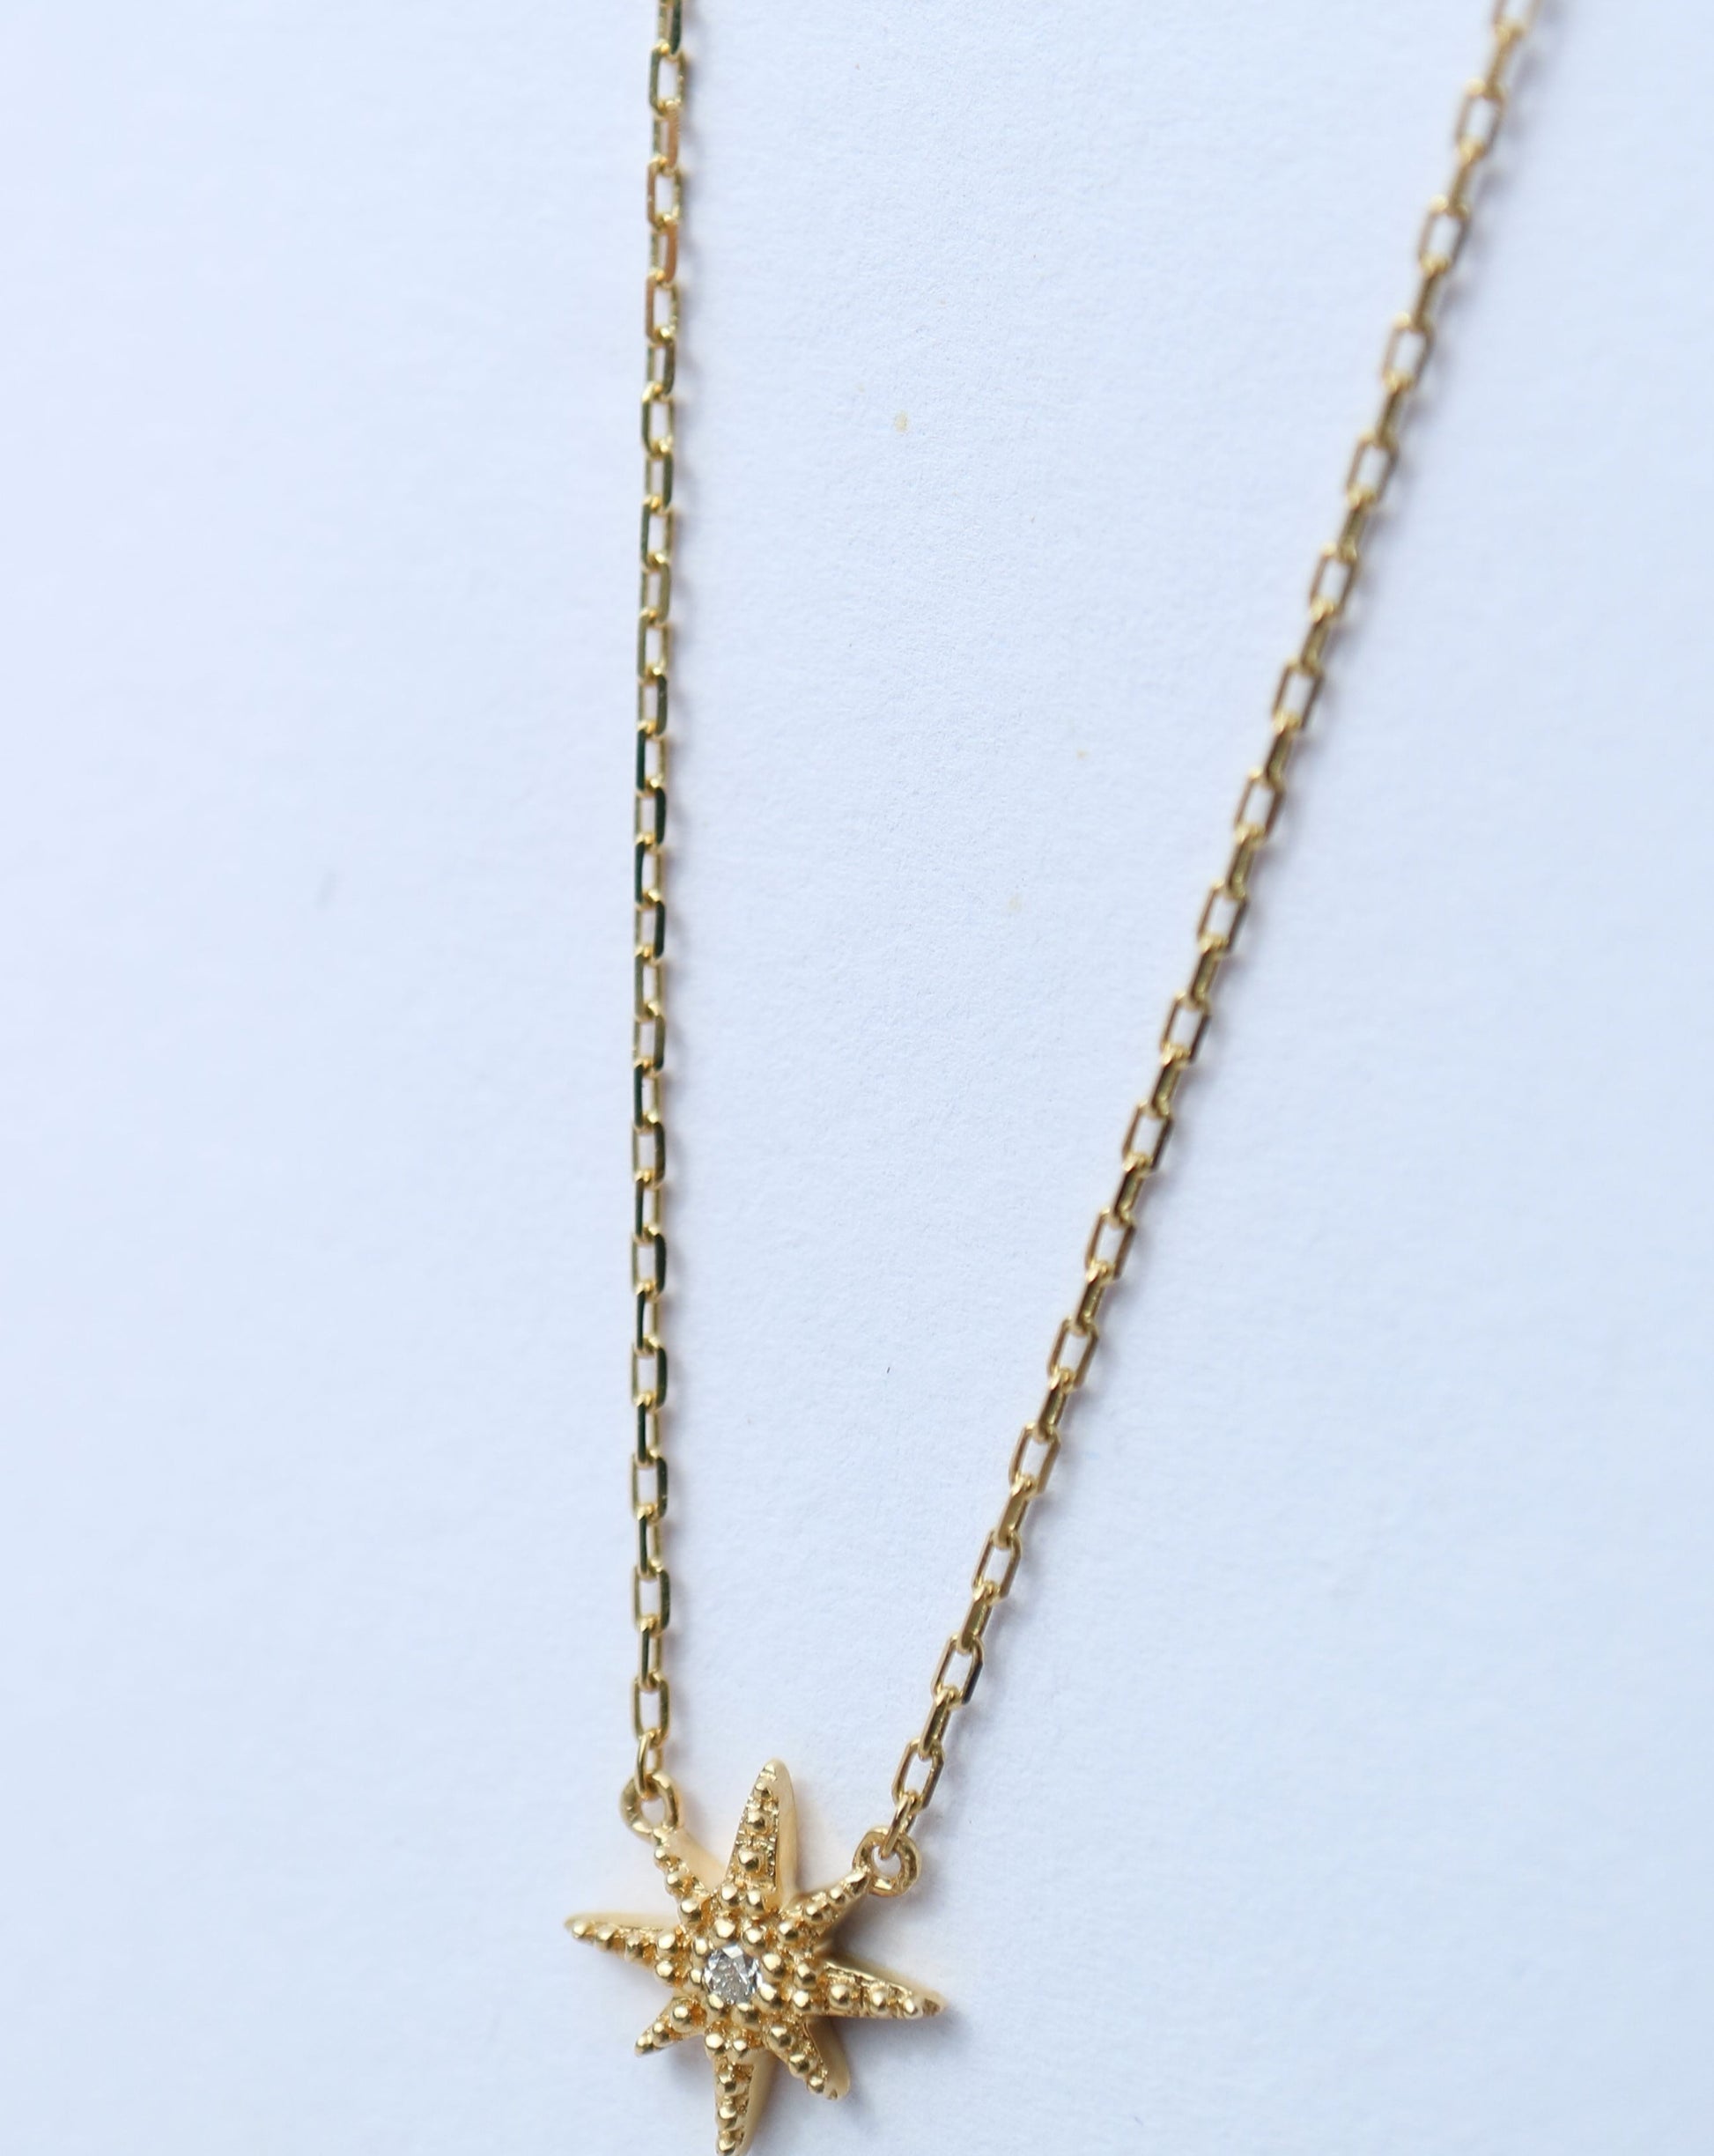 10ct gold and diamond stardust pendant by La Kaiser Jewelry